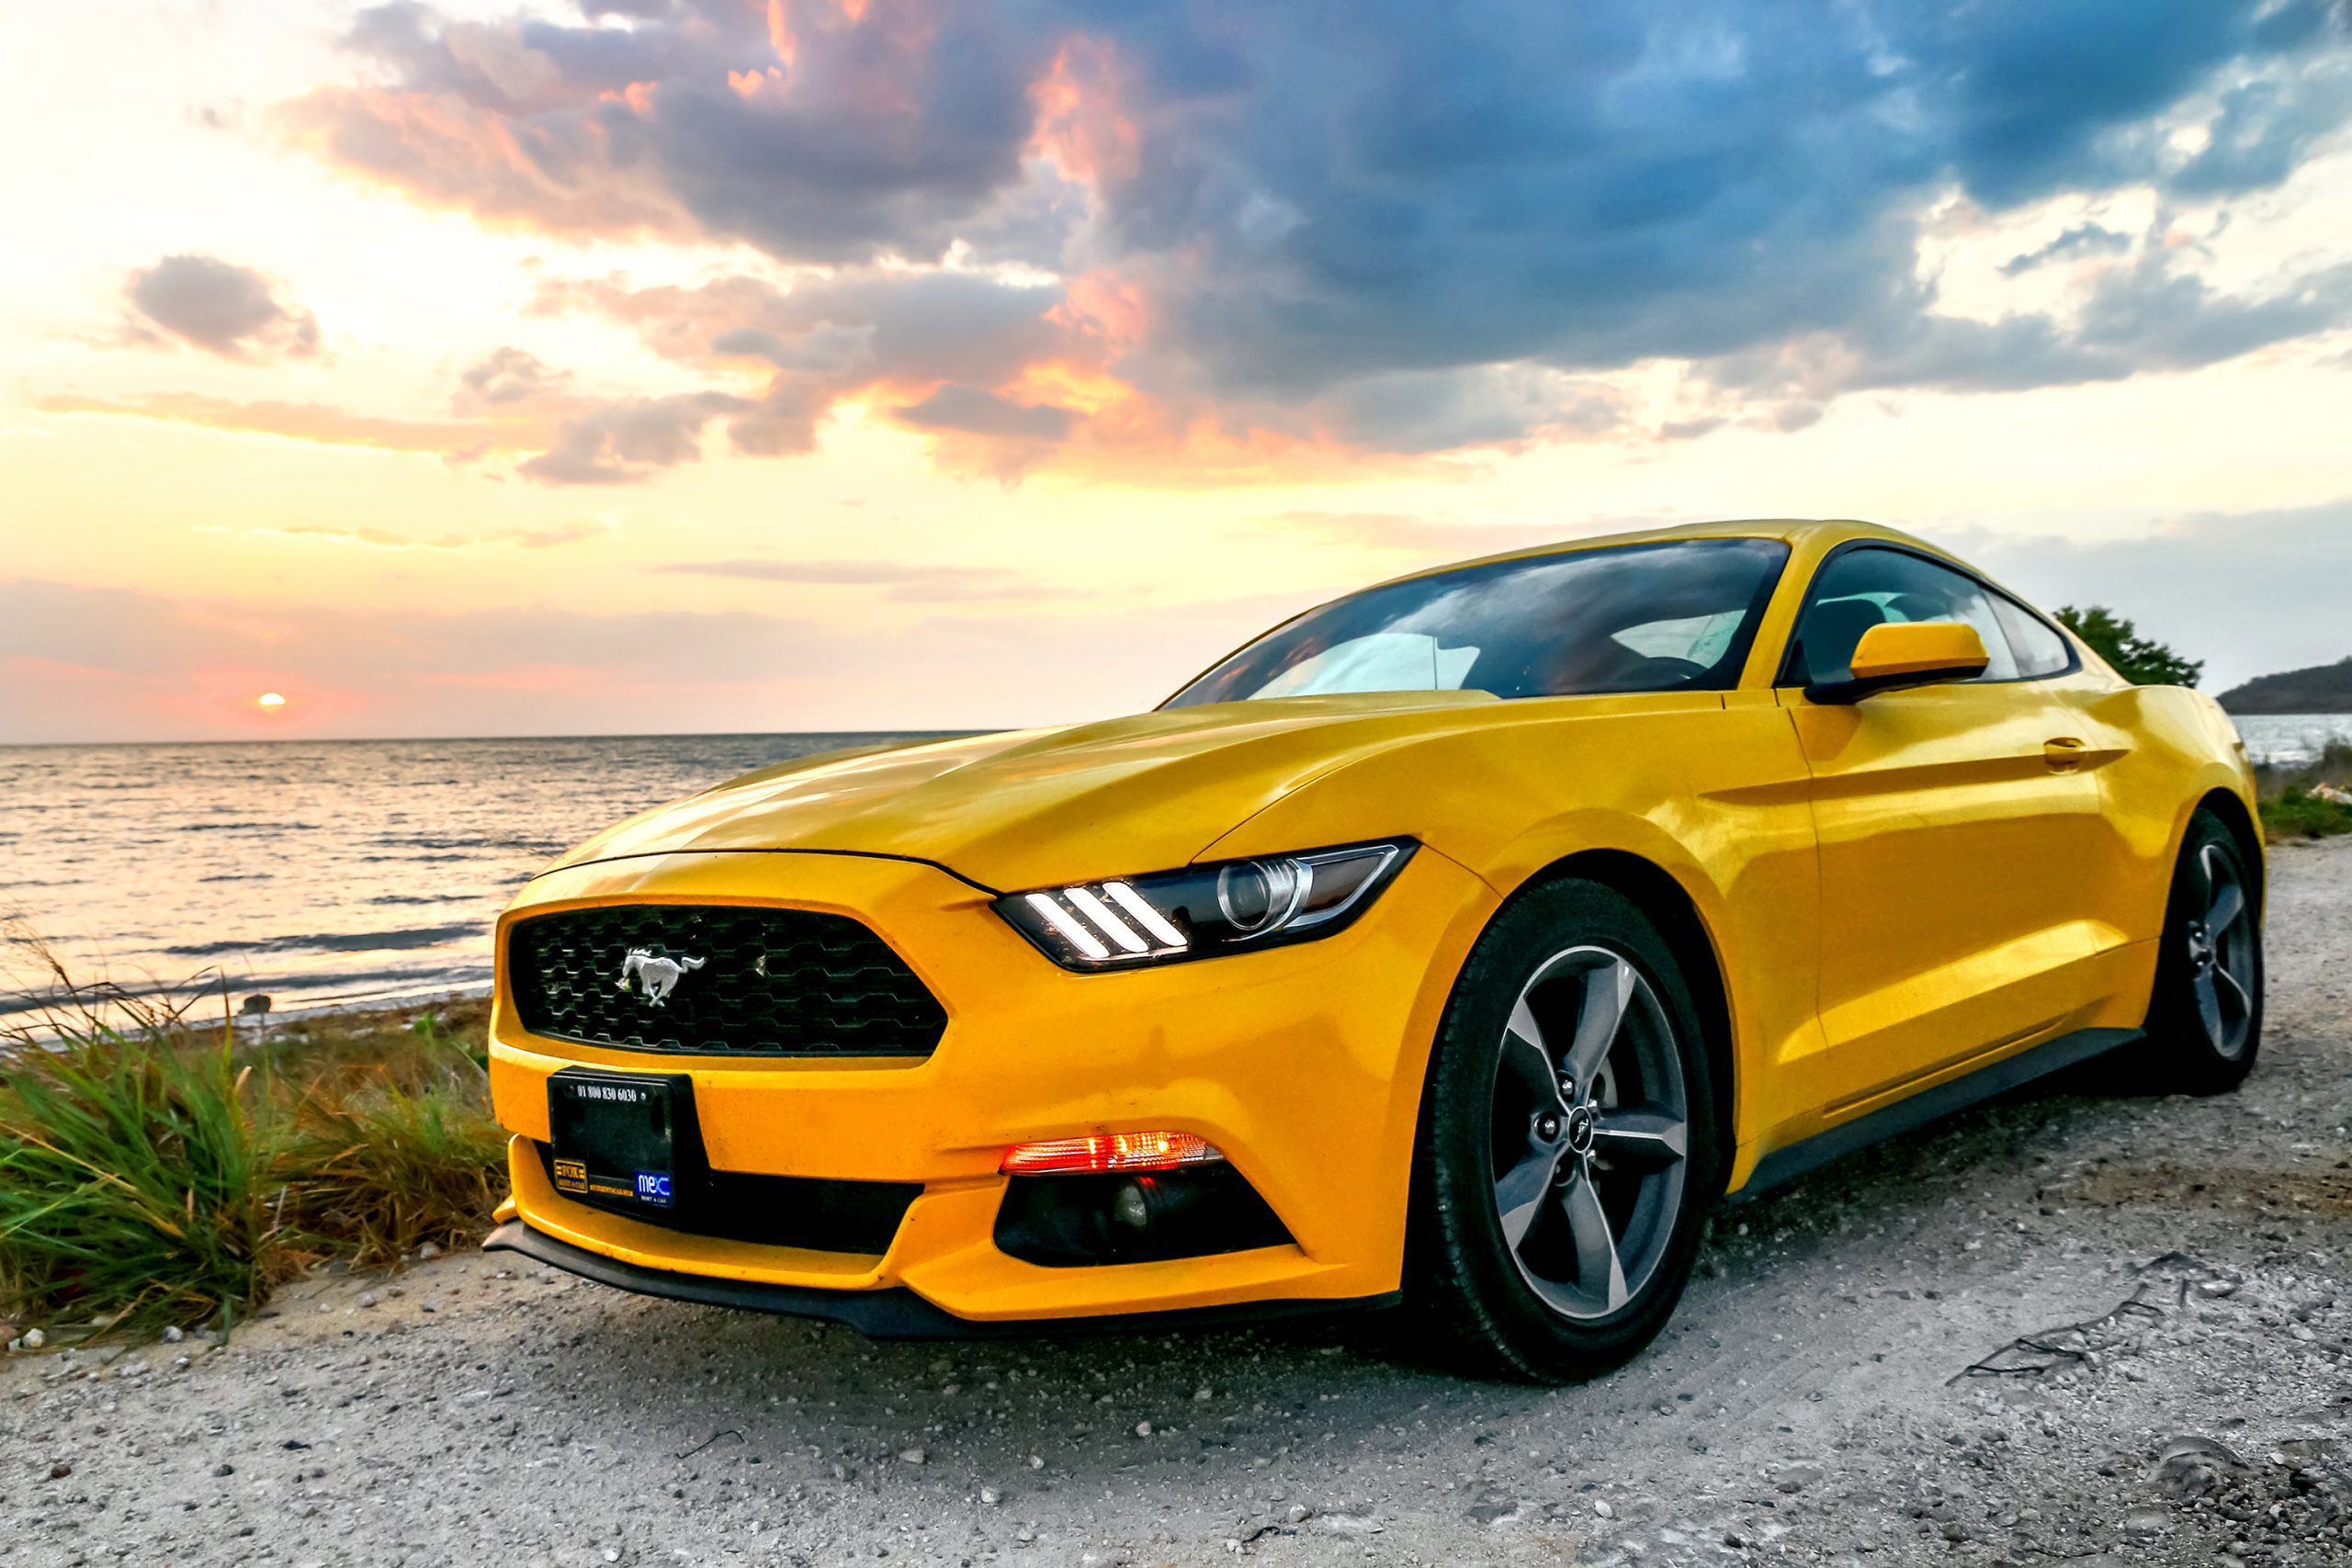 A lawsuit claims a defect exists in the trunk lid wiring of Ford Mustangs.